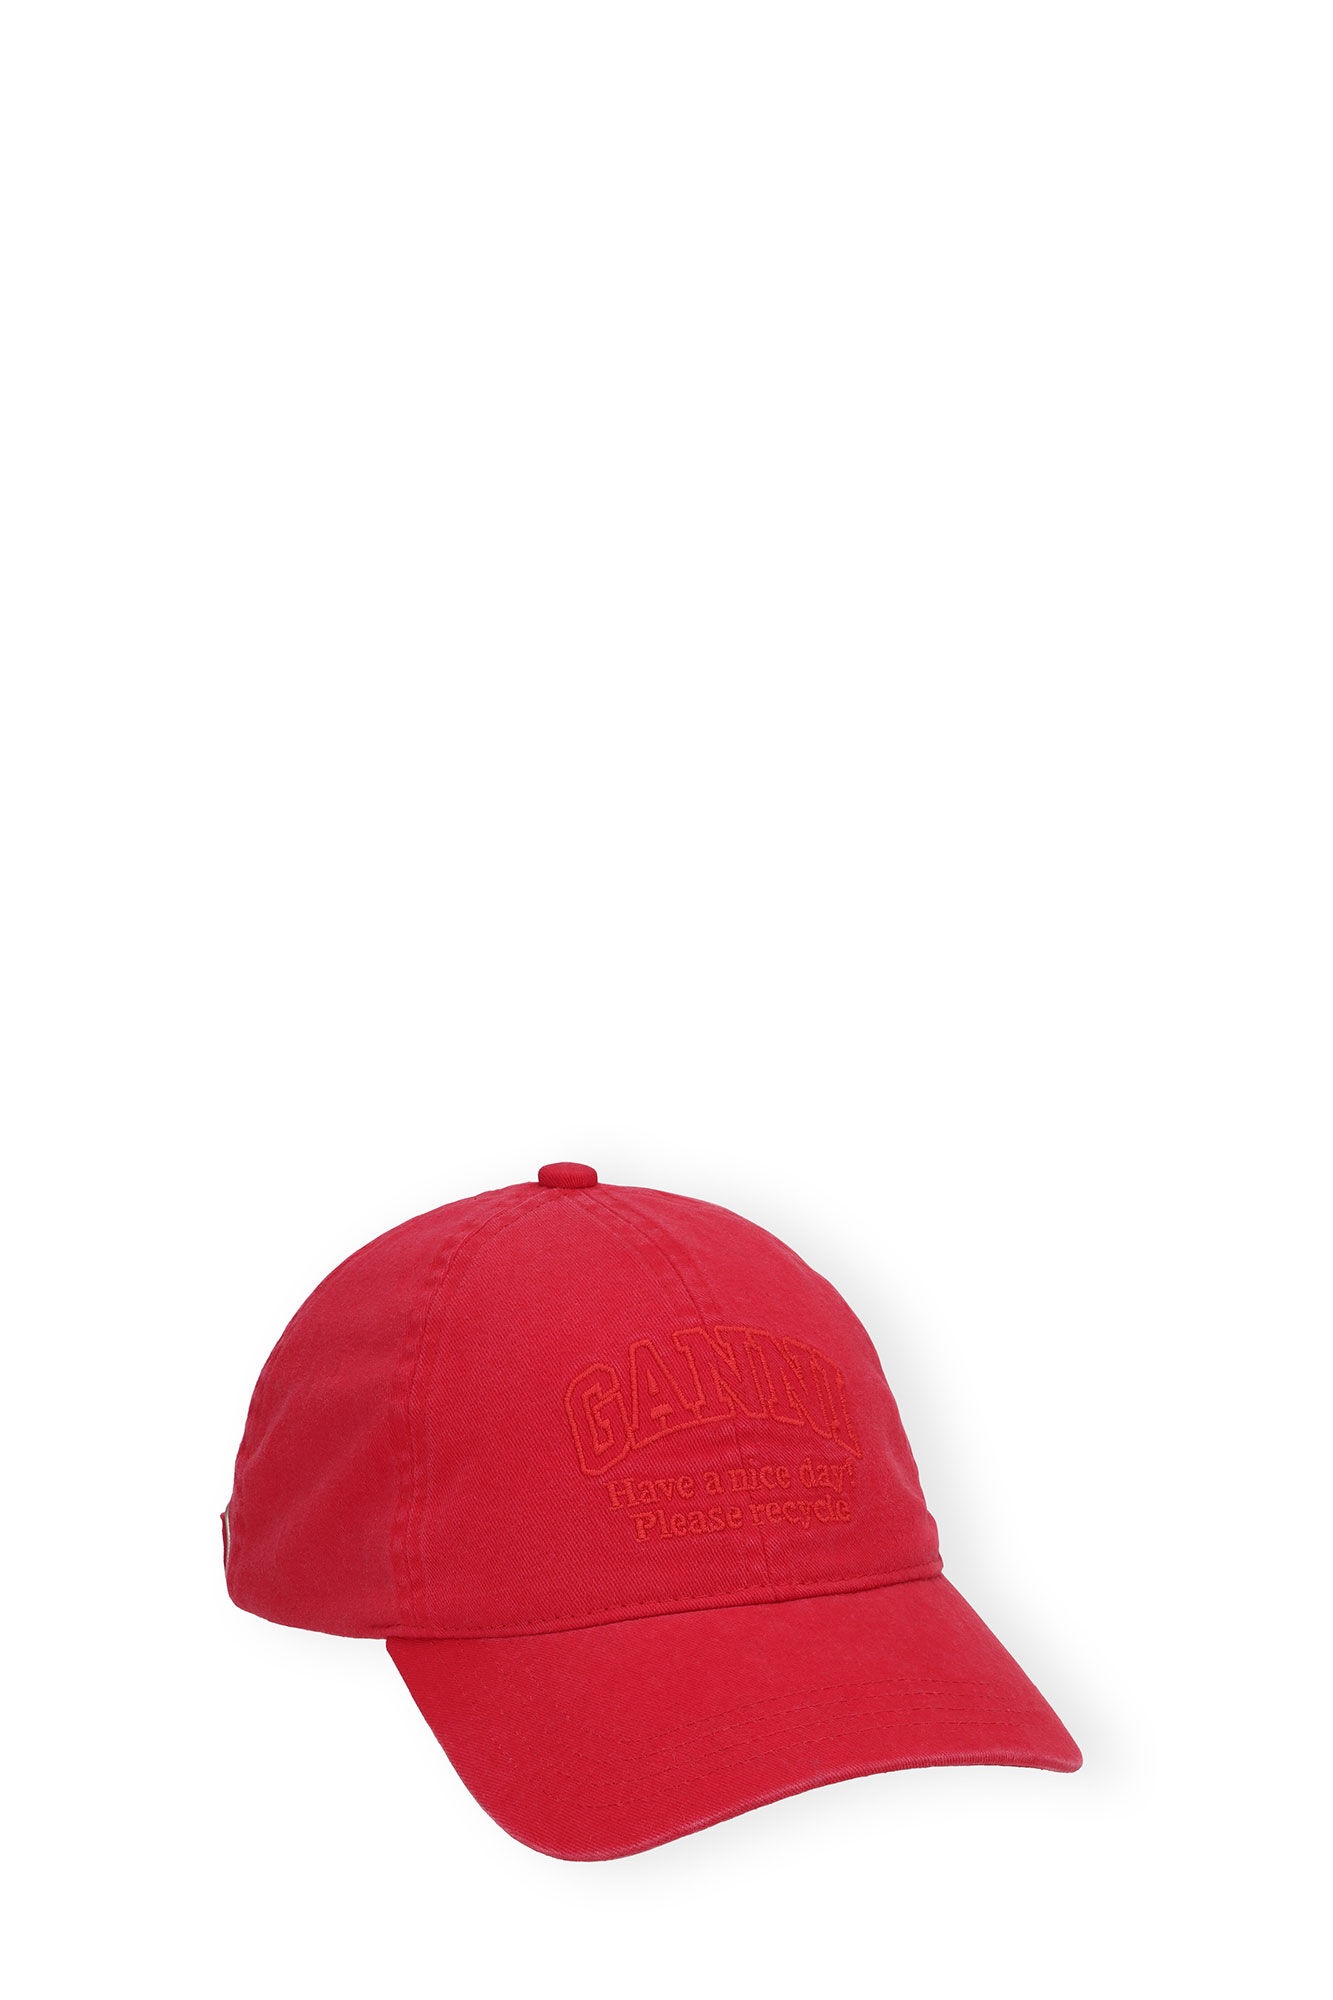 RED EMBROIDERED LOGO CAP - 1